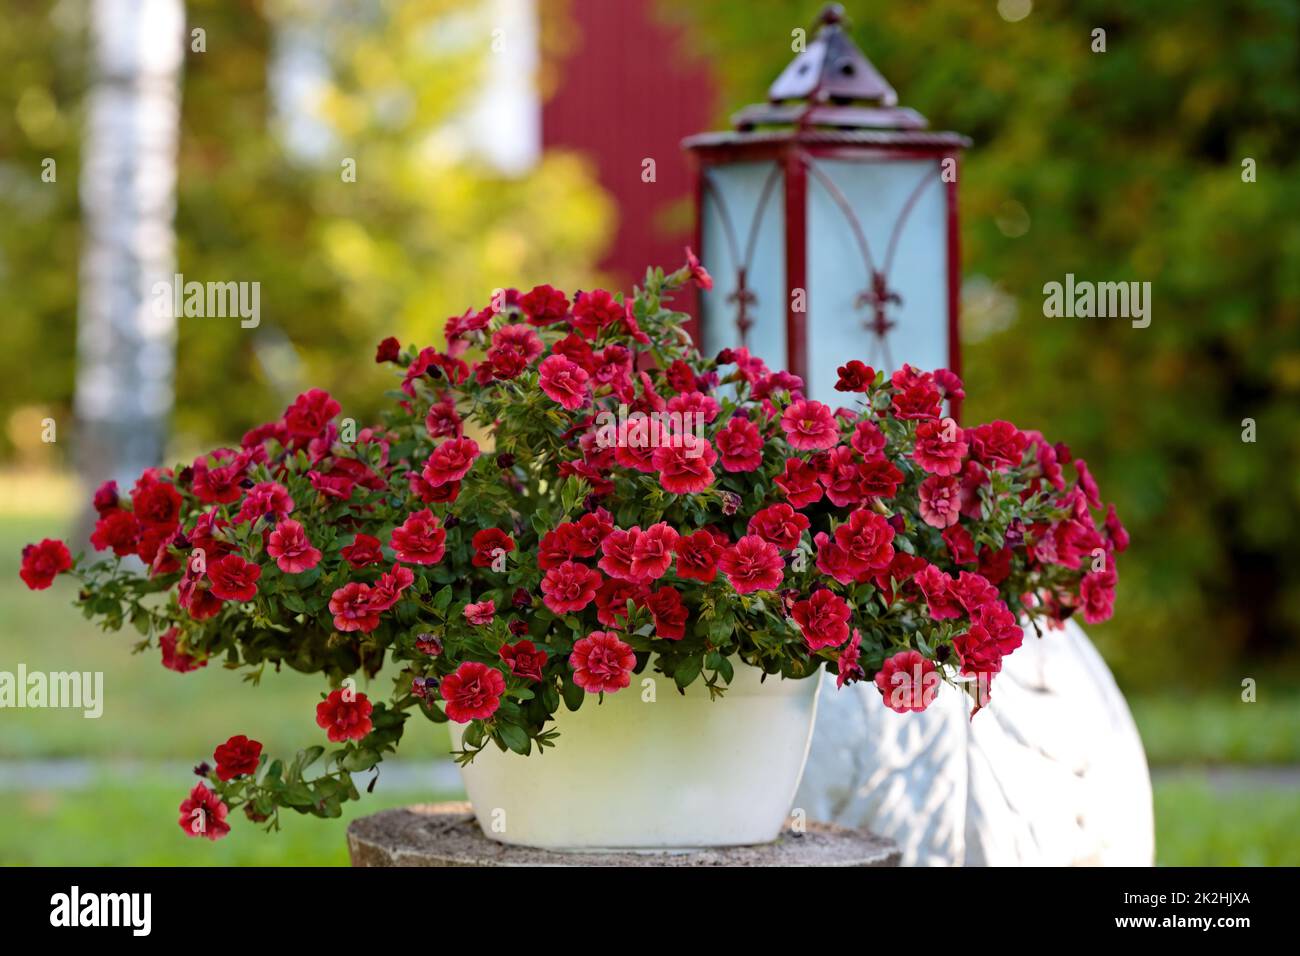 Bright red flowers blooming in a garden Stock Photo